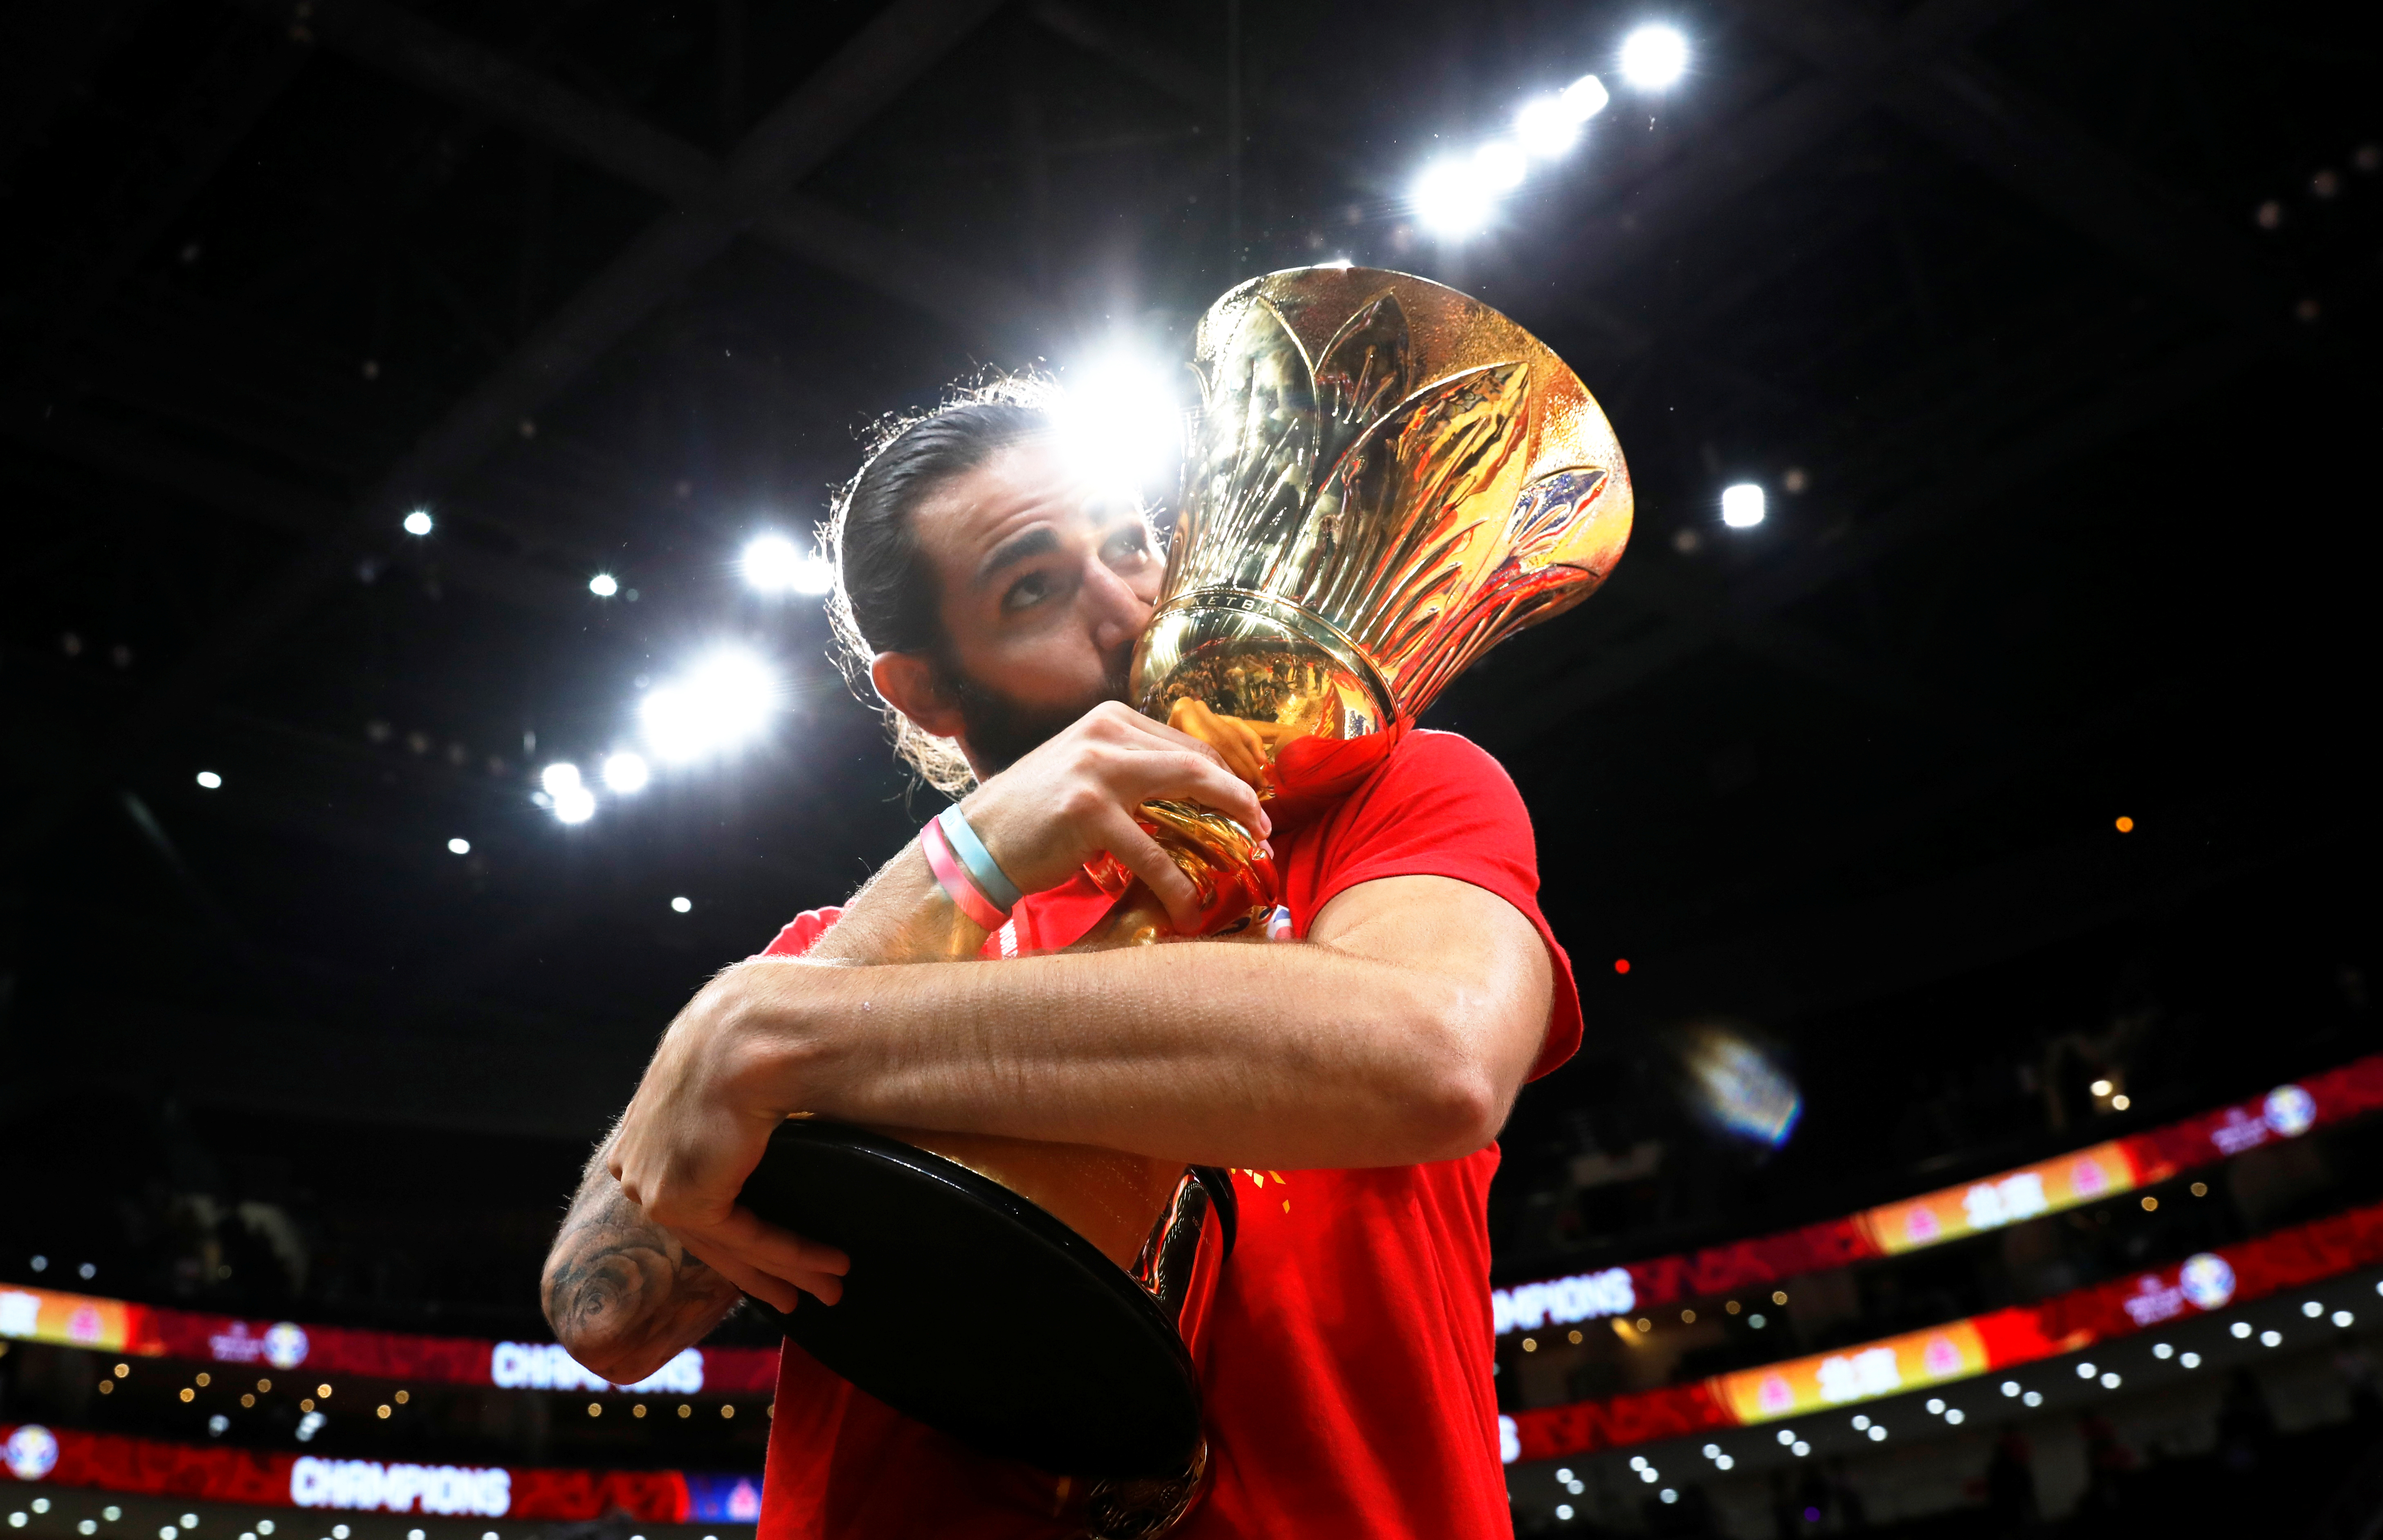 Ricky Rubio kisses the FIBA World Cup trophy after Spain's win over Argentina in the 2019 final (by Reuters/Kim Kyung-Hoon)